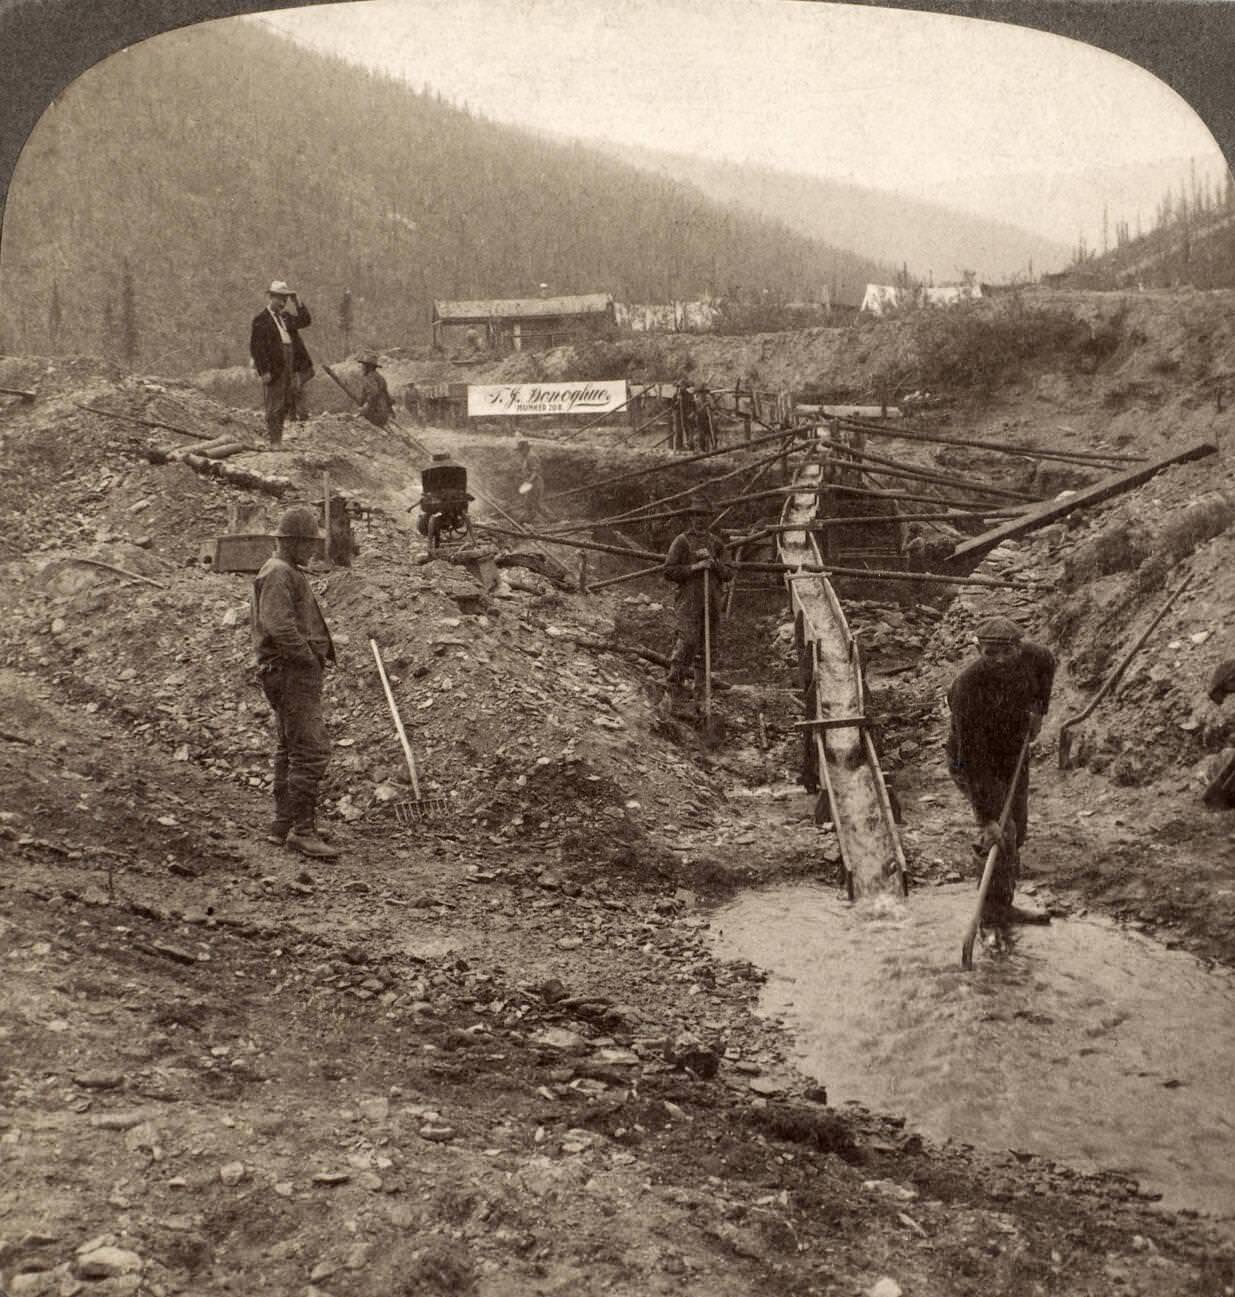 Miners working at a sluice box in Alaska during the Klondike Gold Rush, circa 1898.